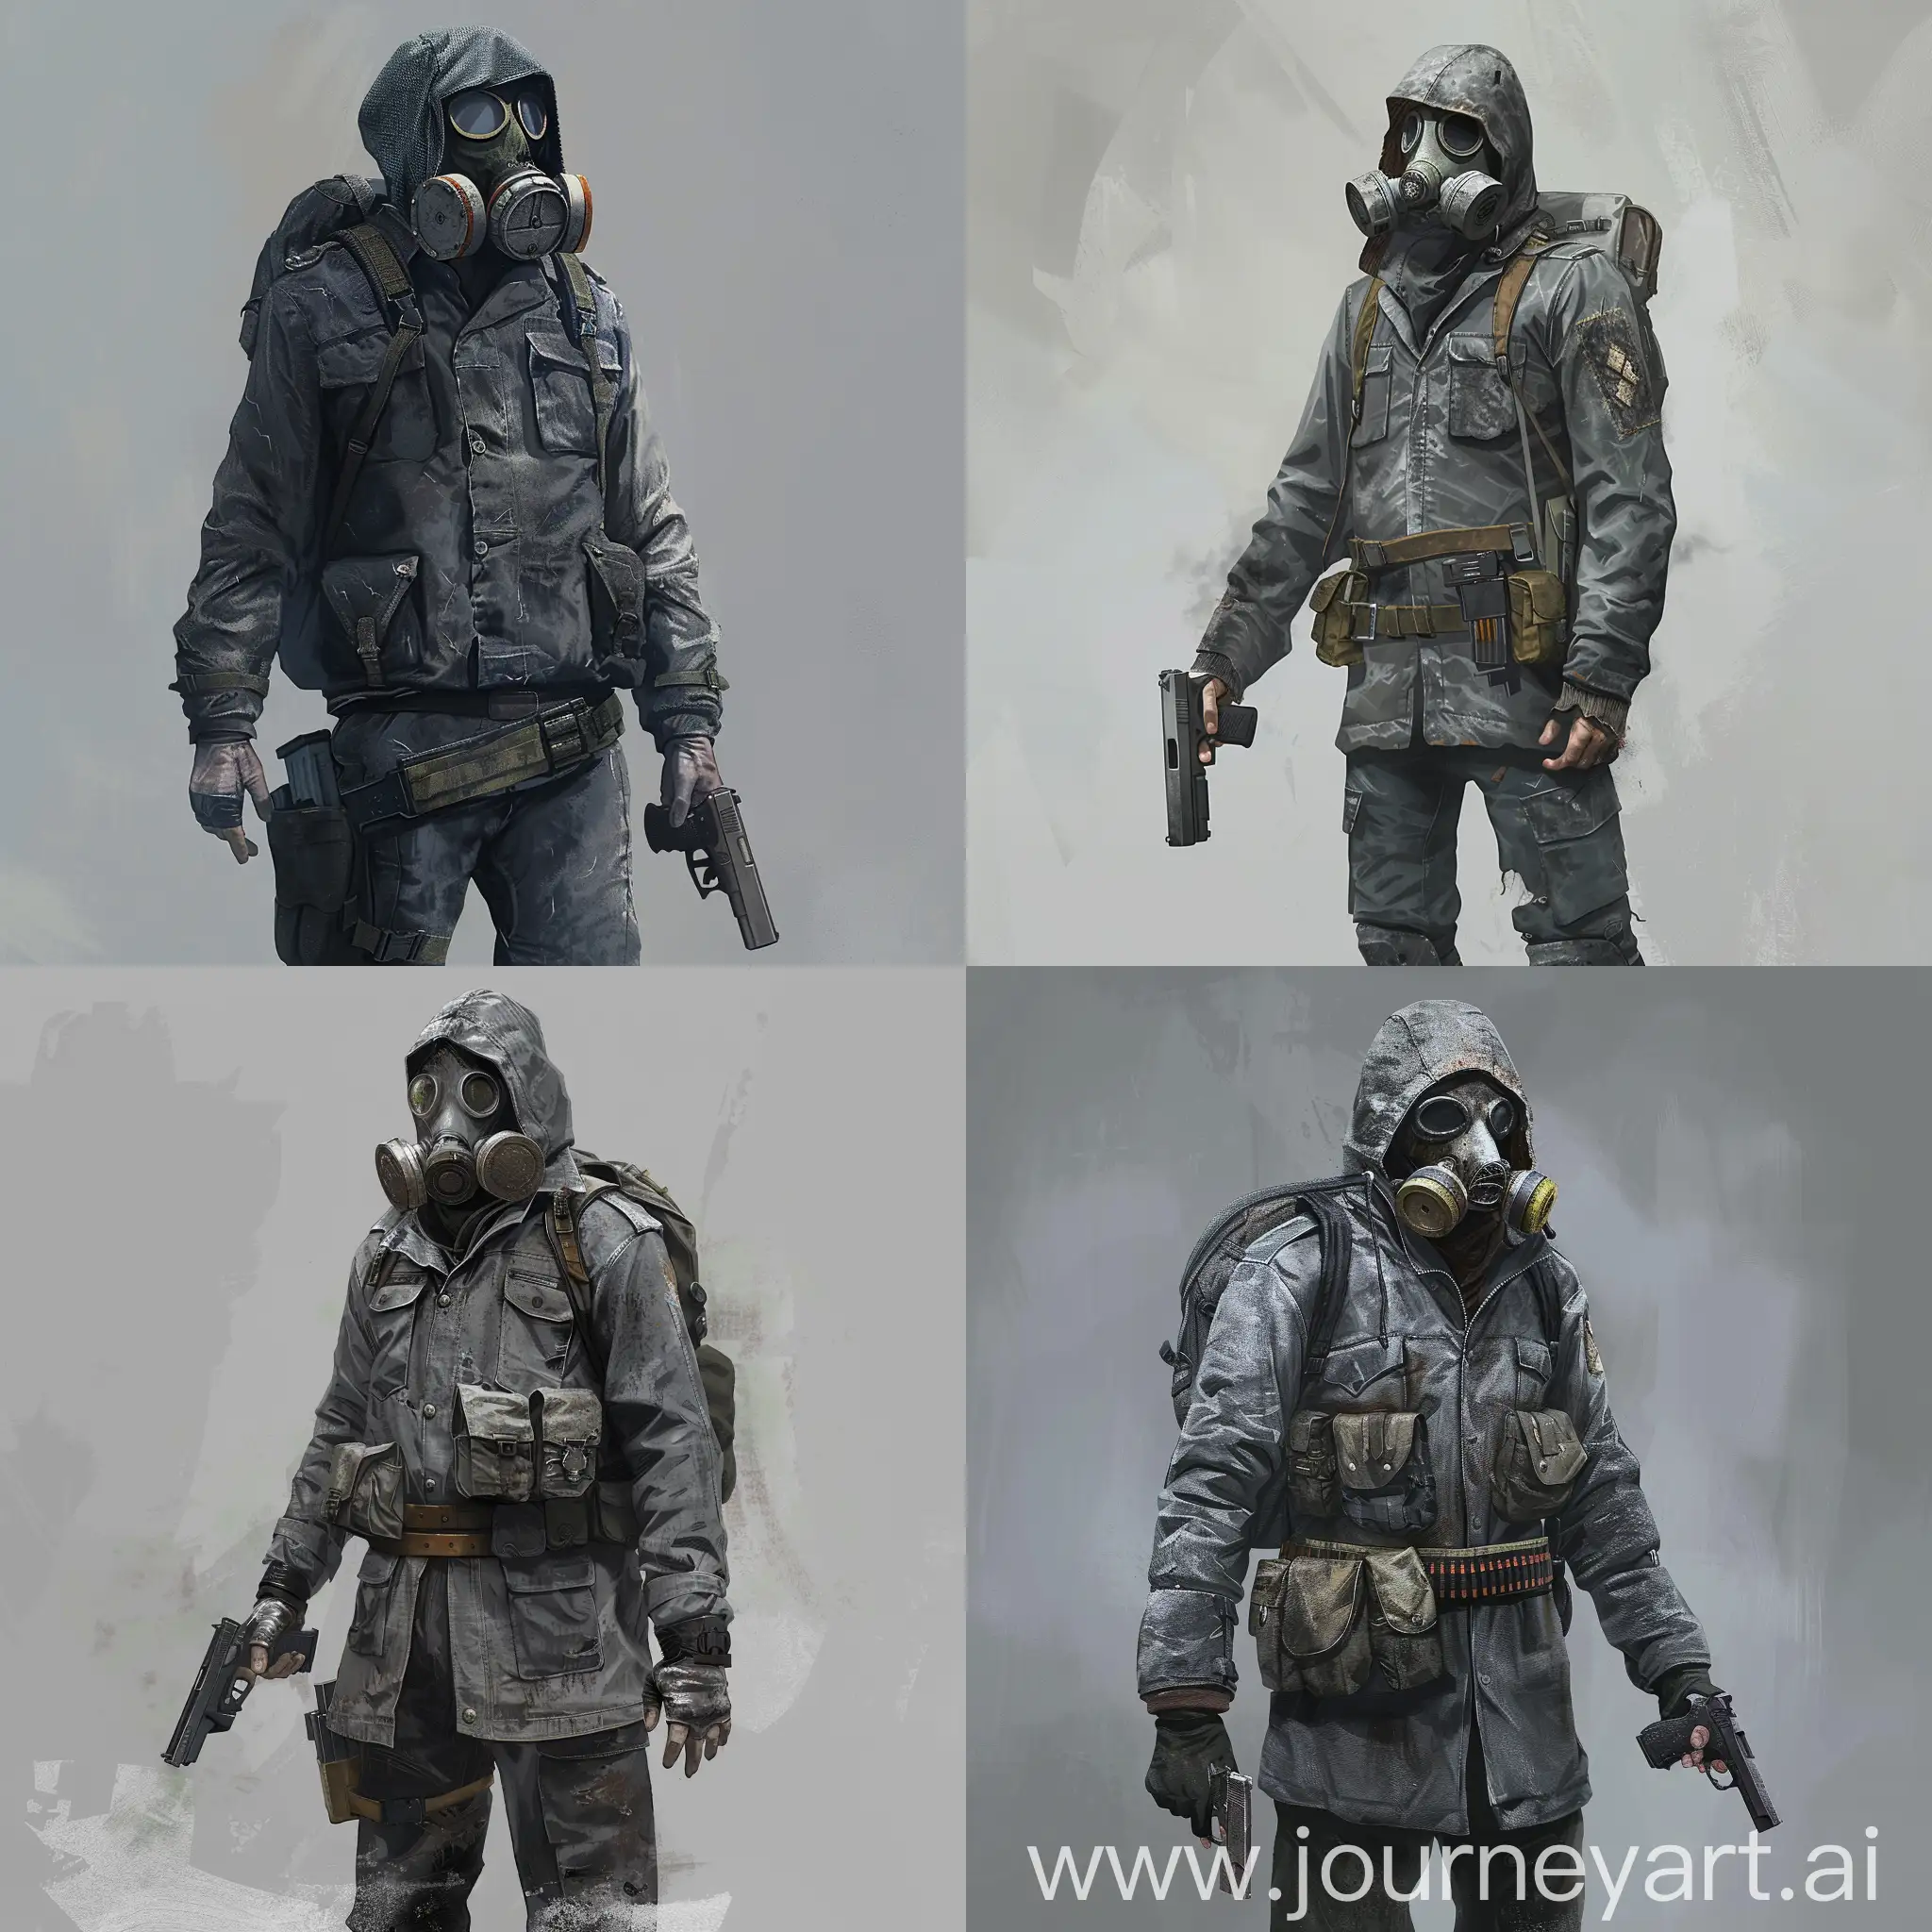 Stalker character concept art, gasmask, gray old jacket, small backpack, a belt with pouches on the waist, pistol in hand, digital concept art